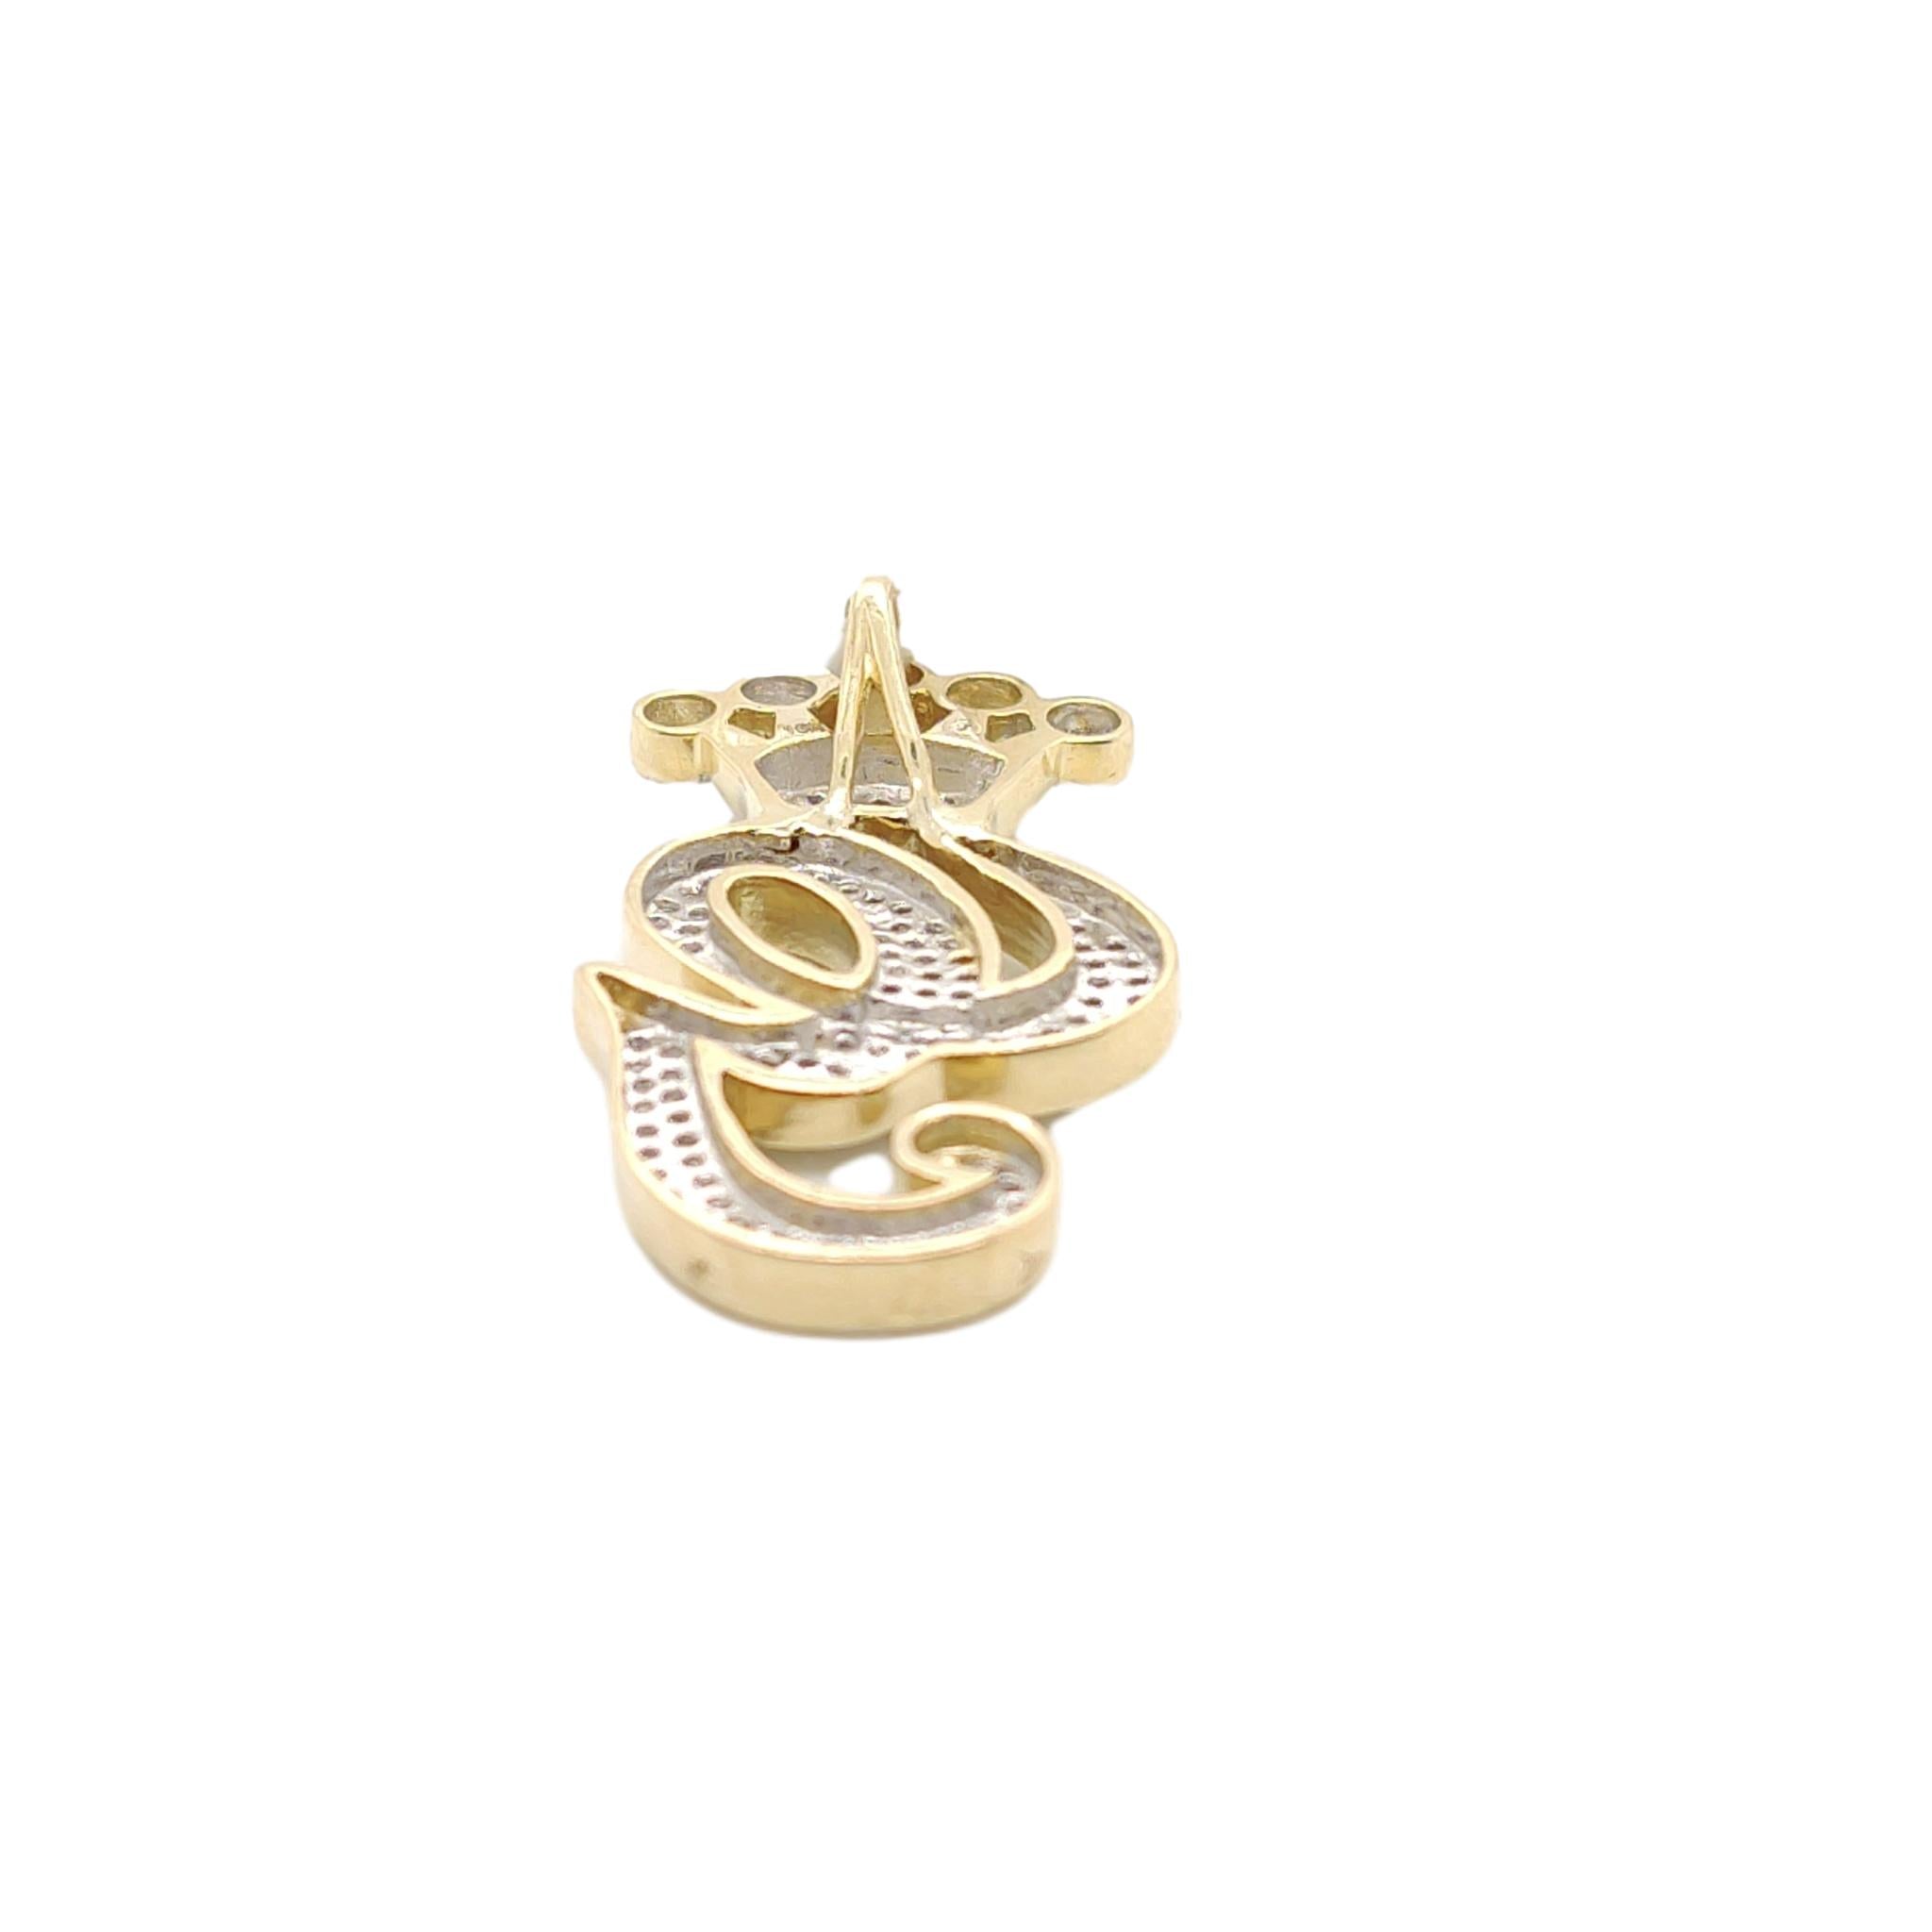 10K Yellow Gold Diamond G Letter Charm with Crown Small Size